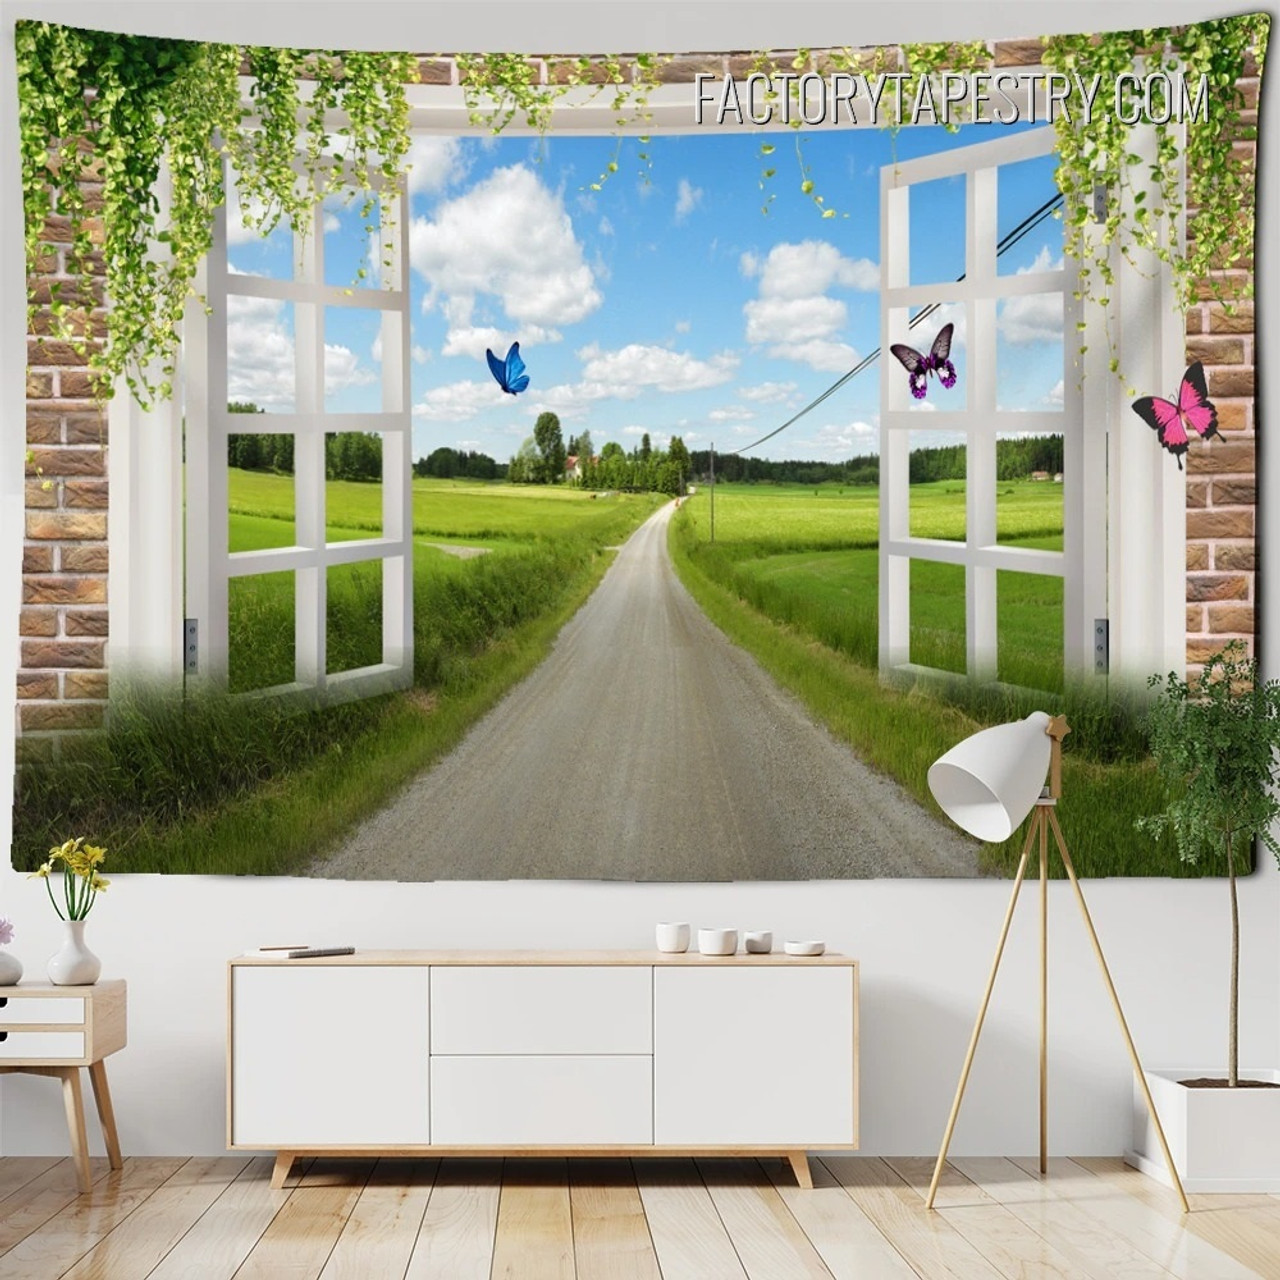 Countryside Road Nature Landscape Modern Wall Decor Tapestry for Room Decoration